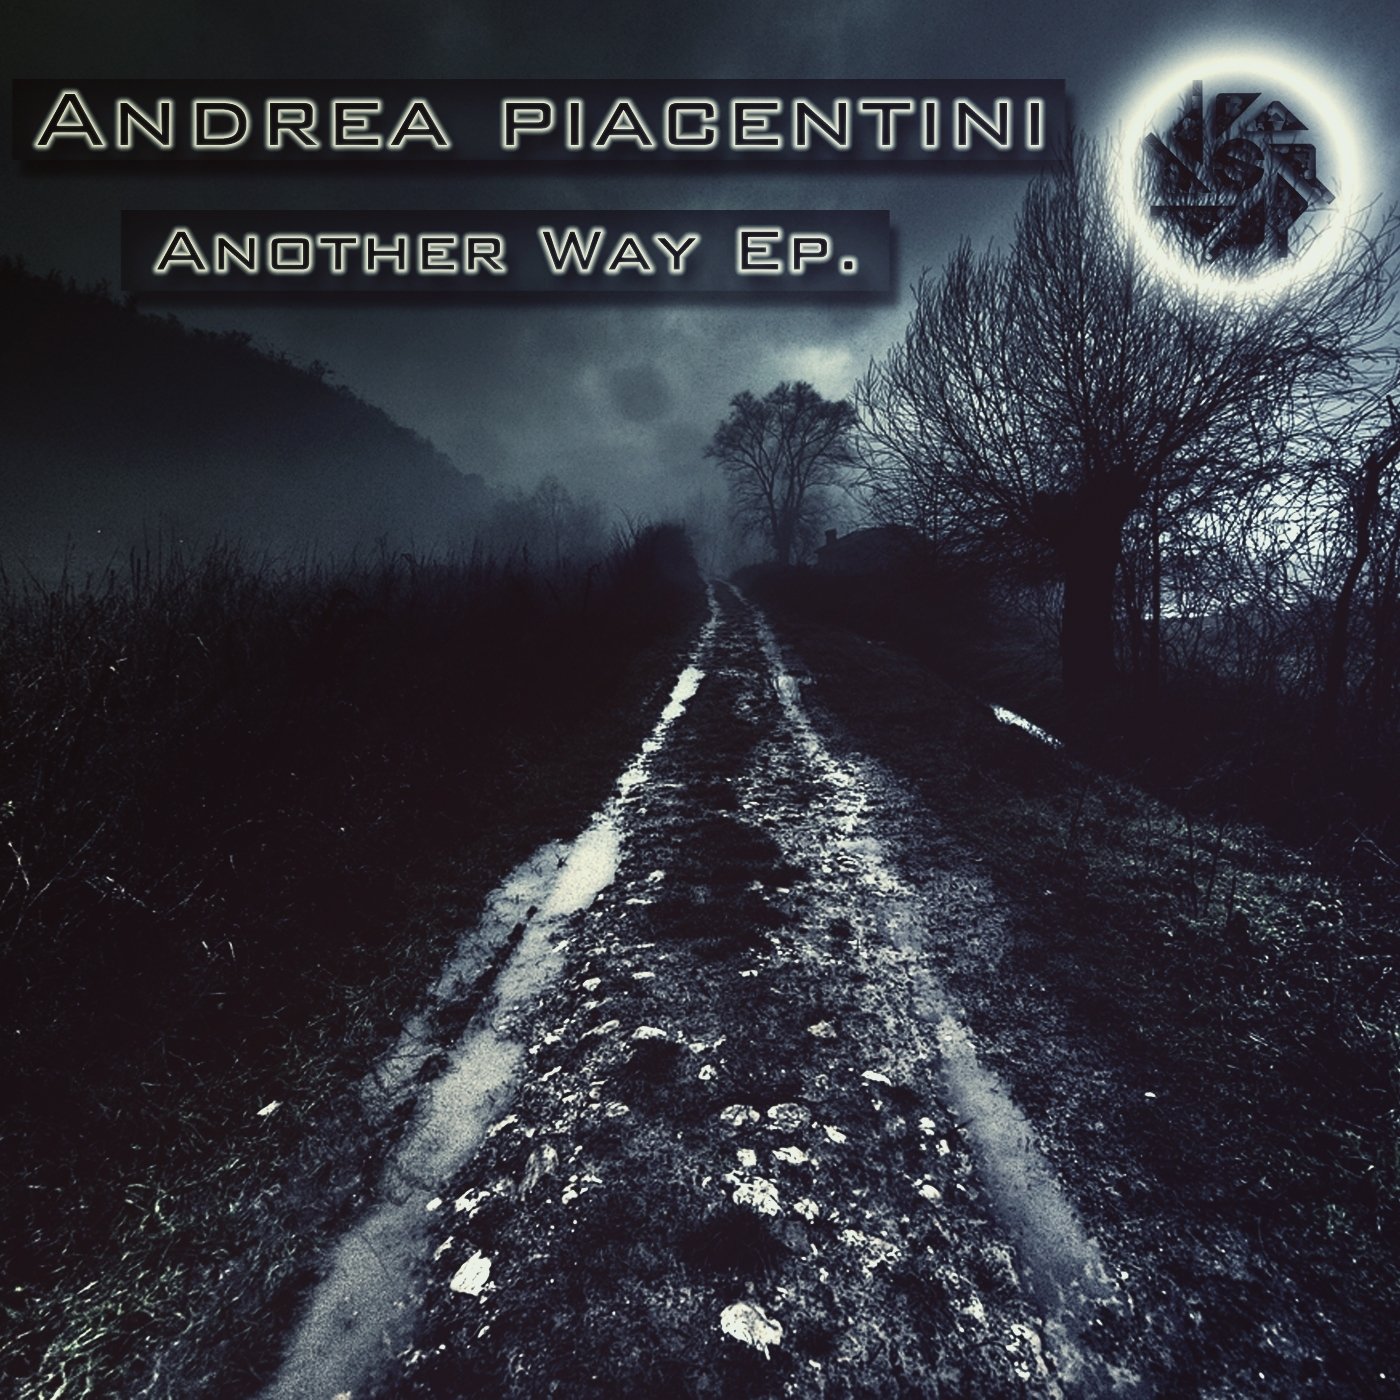 This another way. Another way. Another Dream - another way. Andrea Ep. Another обложка полностью.